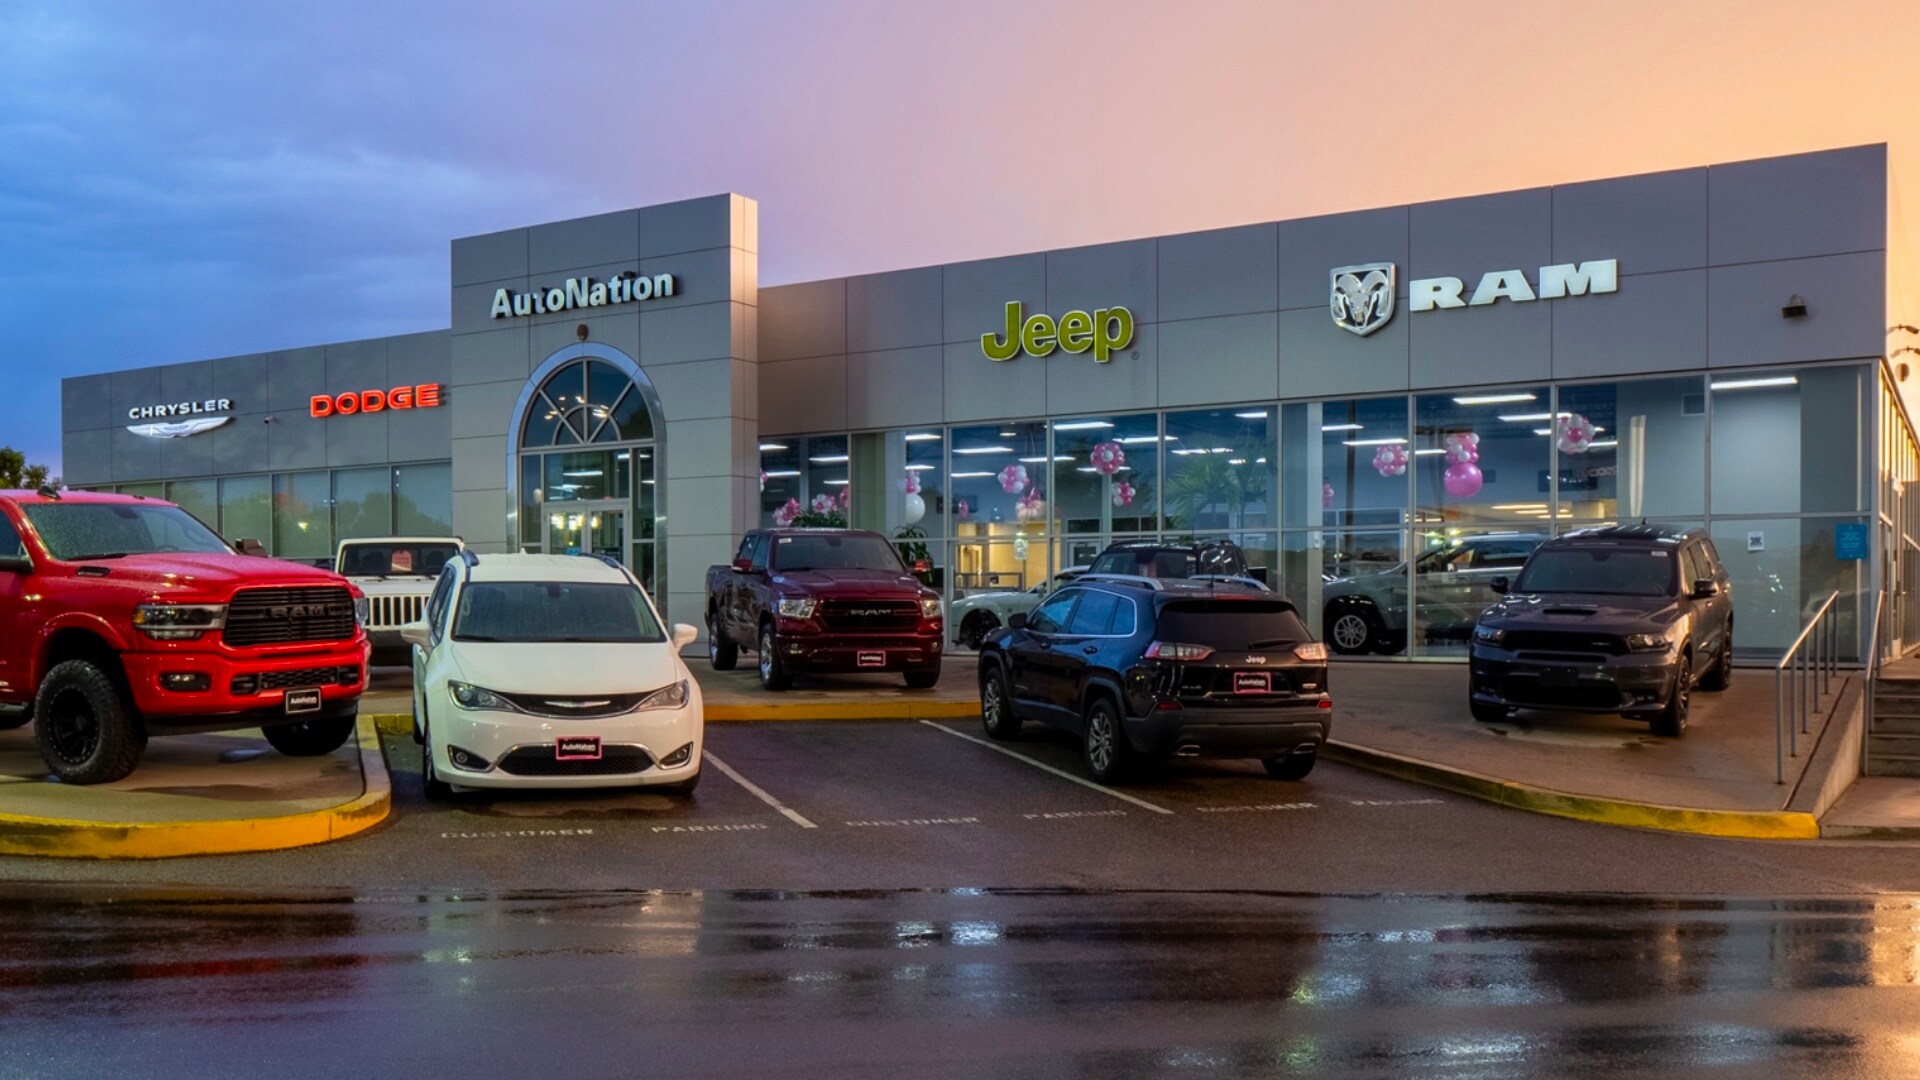 Exterior view of AutoNation Chrysler Dodge Jeep Ram Southwest during a sunrise or sunset. There is a slightly cloudy sky and many vehicles parked near the grey building. Trees and greenery are visible around the parking lot and surrounding area.